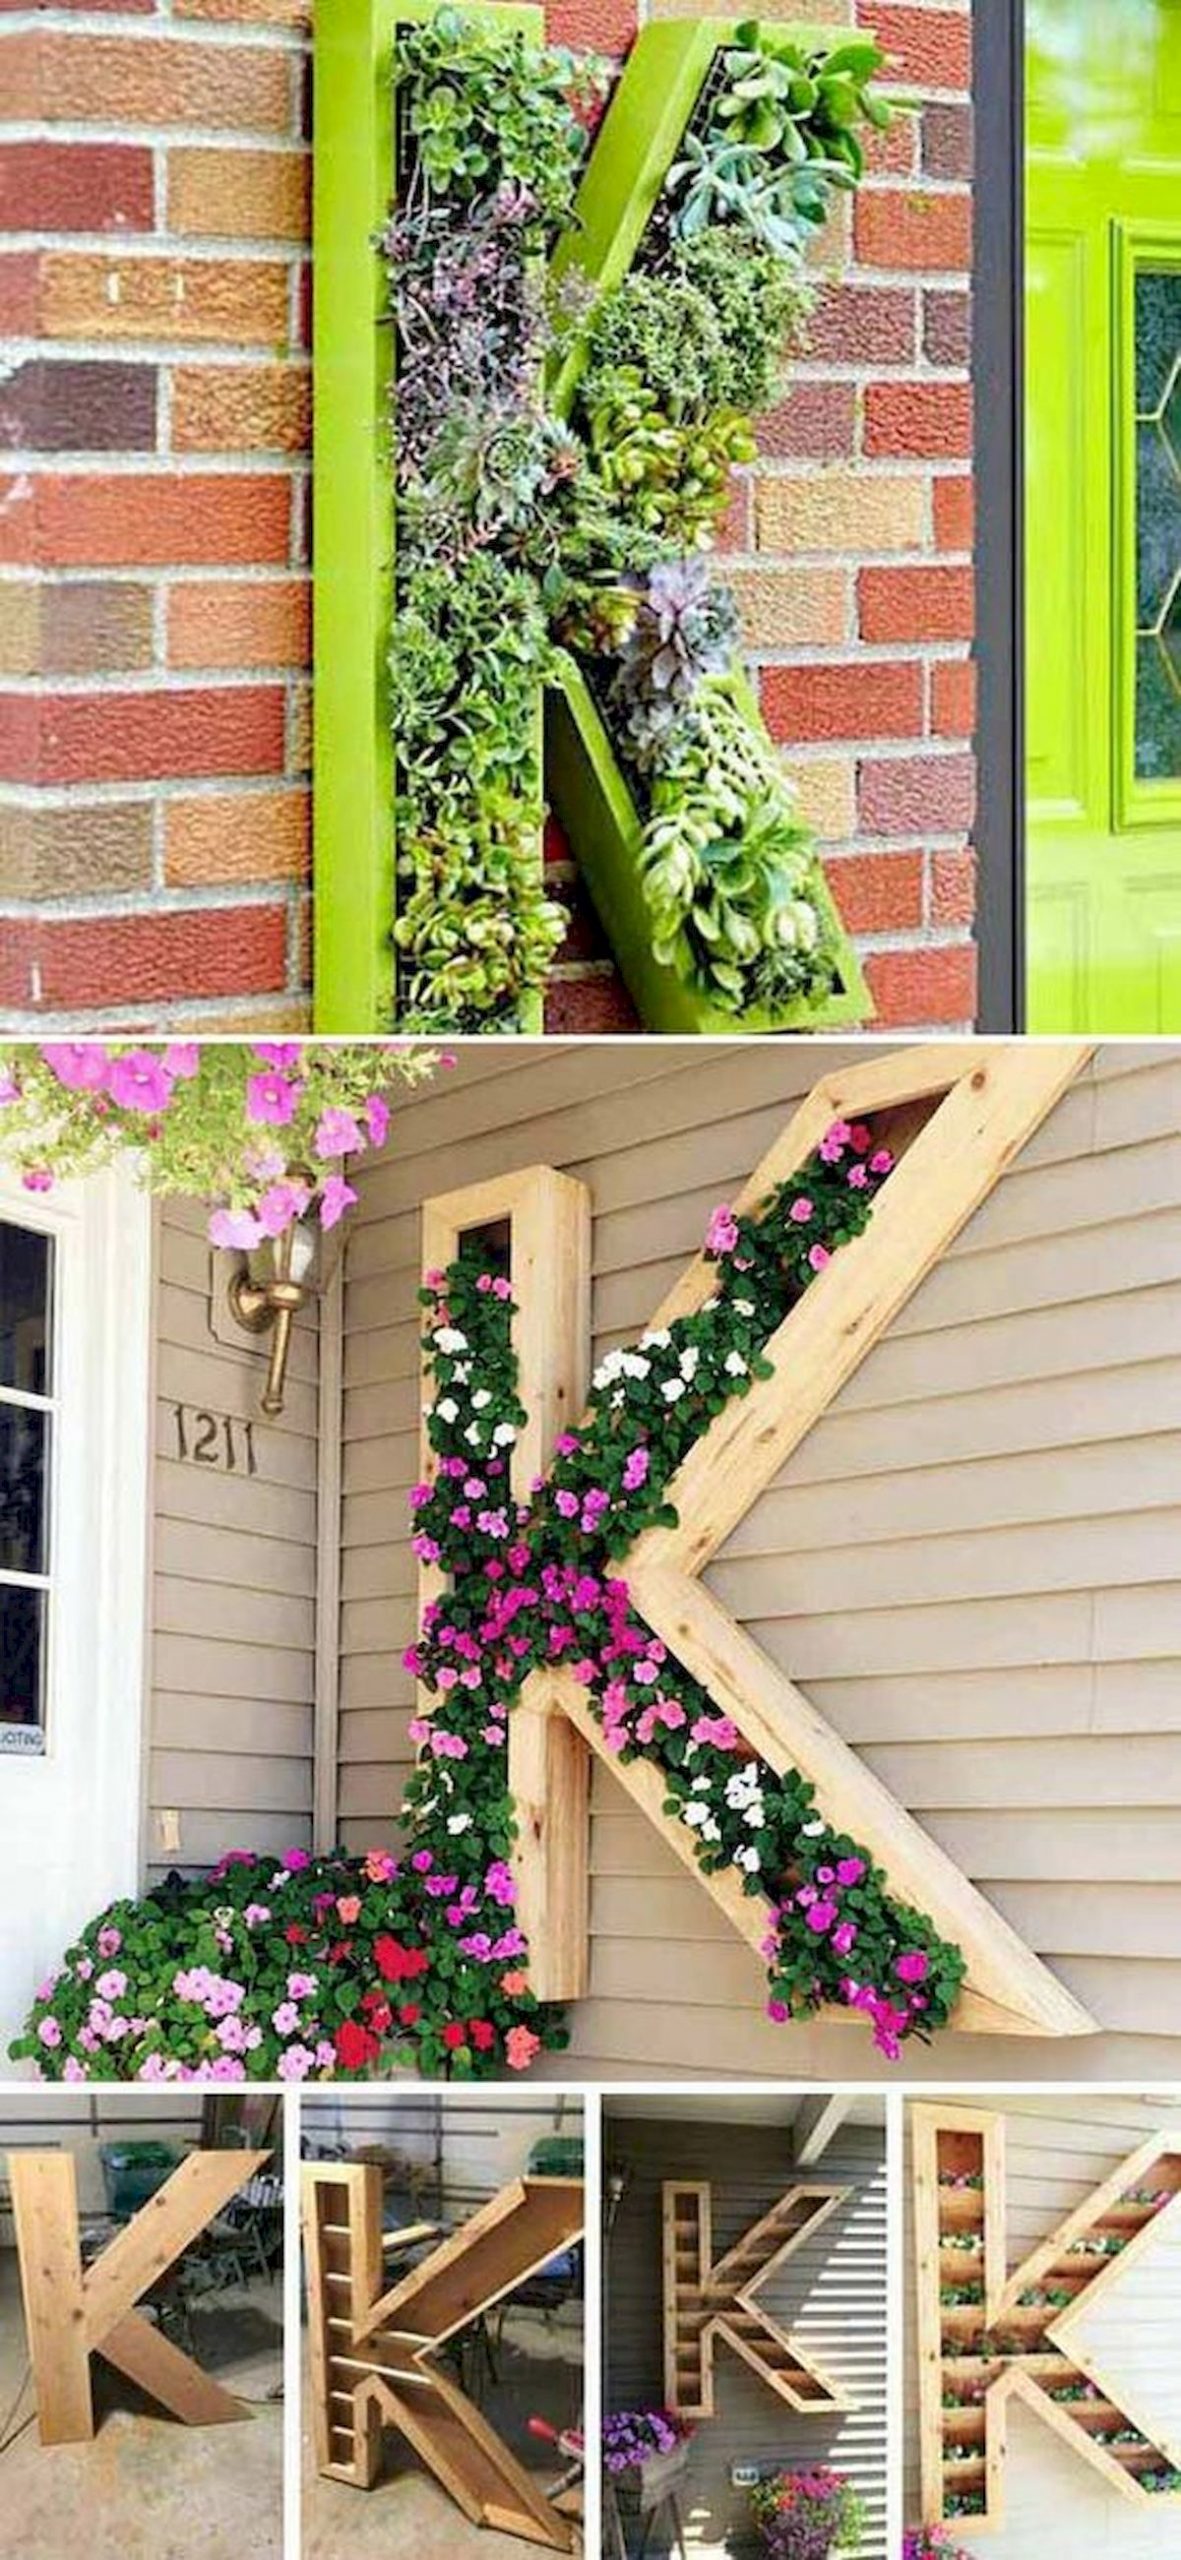 20 Awesome Planter Ideas for Your Front Porch (9)